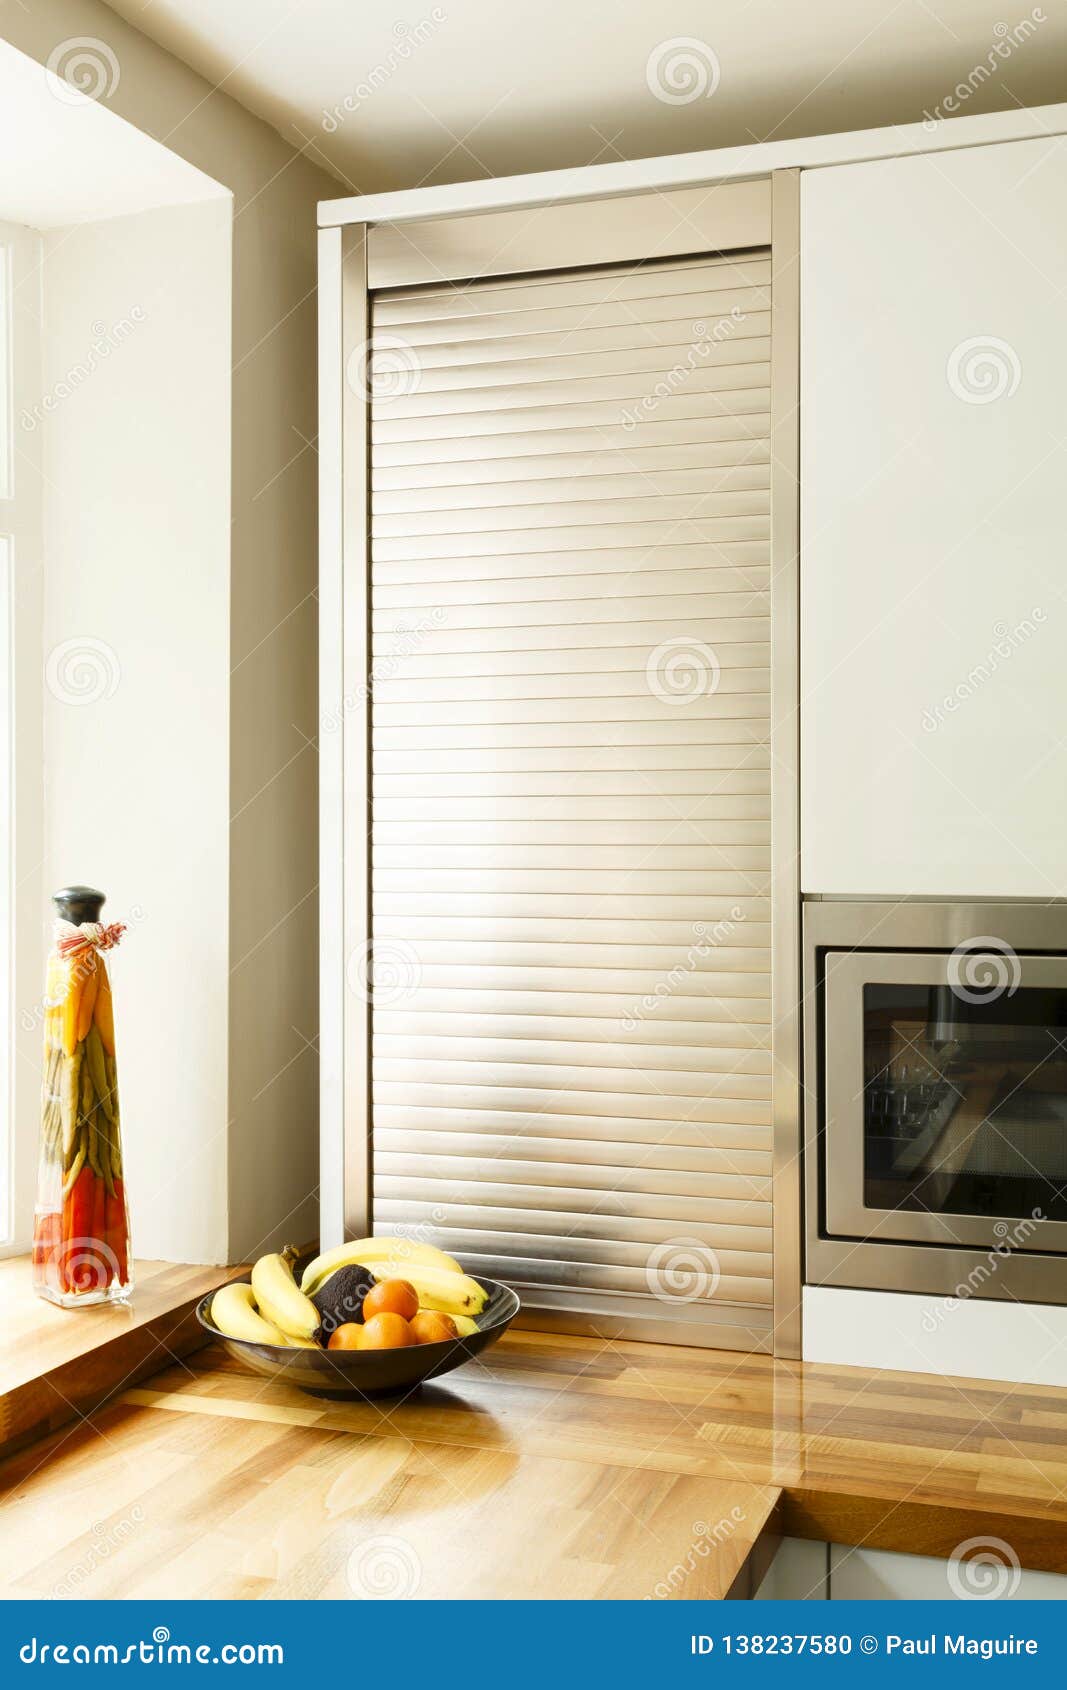 Roller Shutter Cupboard Stock Photo Image Of Cabinet 138237580